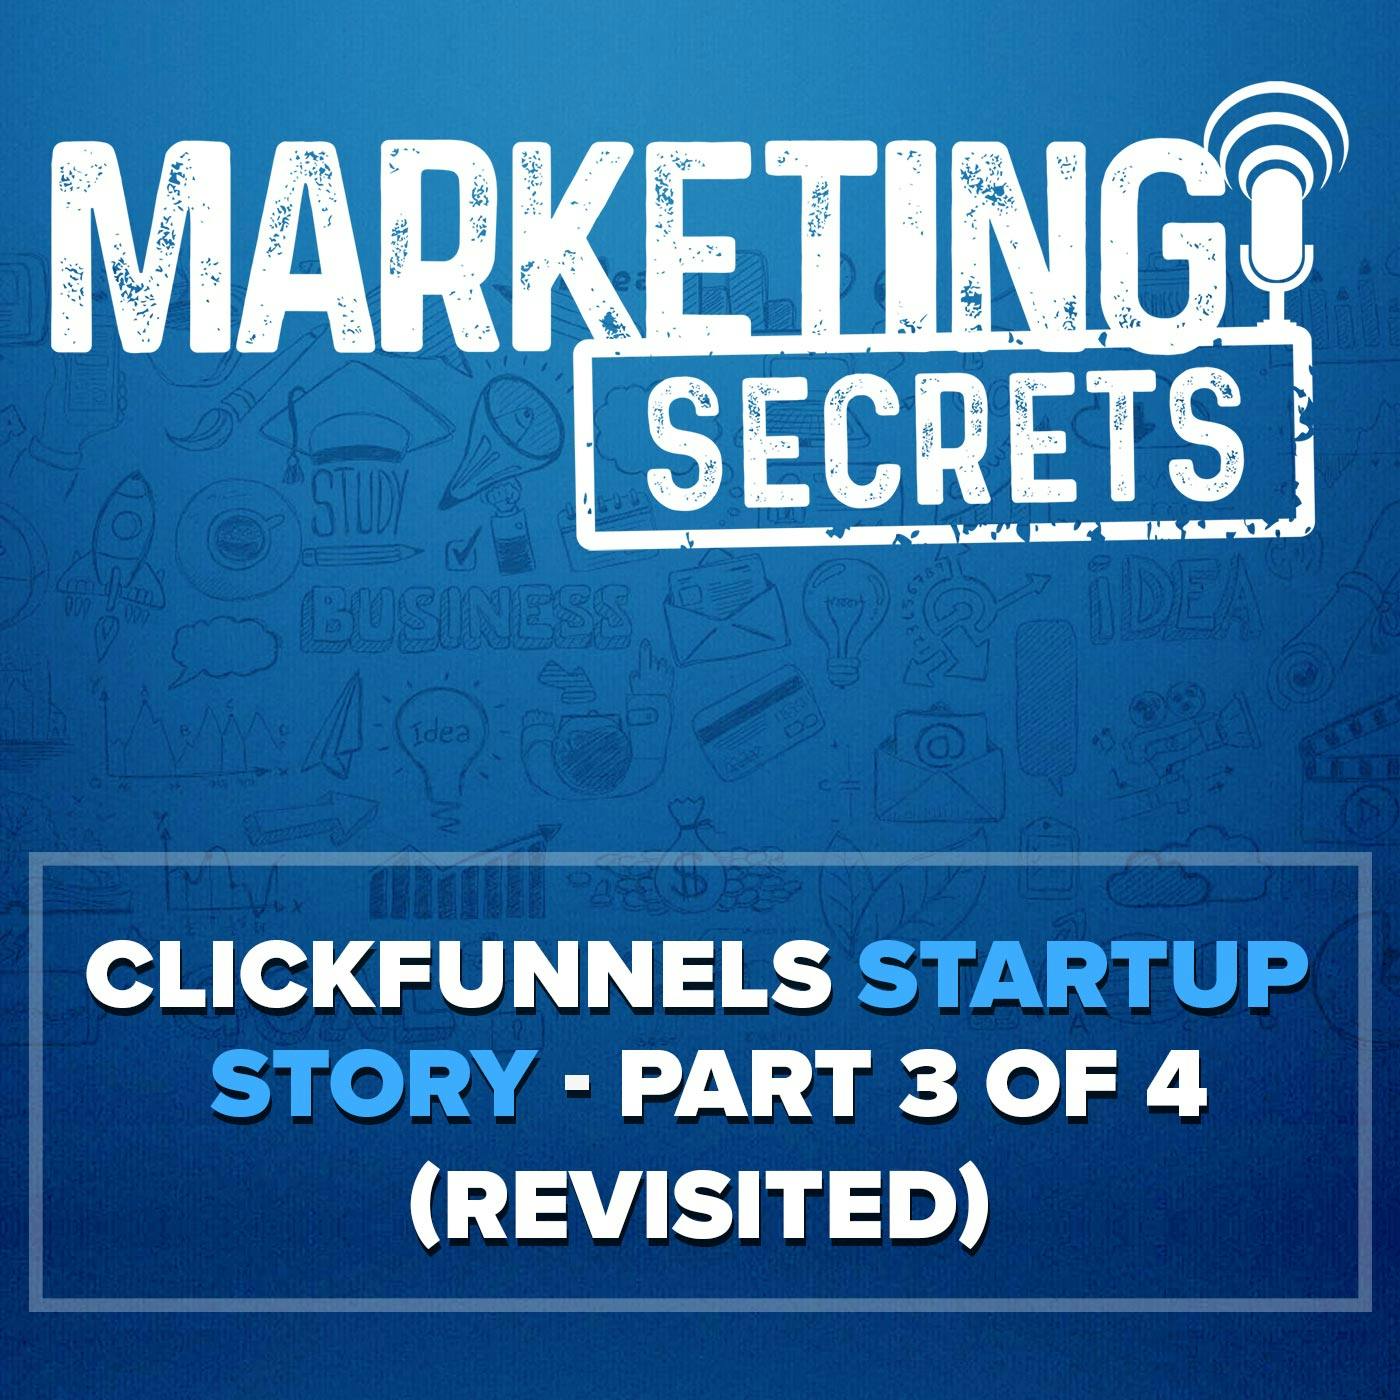 ClickFunnels Startup Story - Part 3 of 4 (Revisited!)